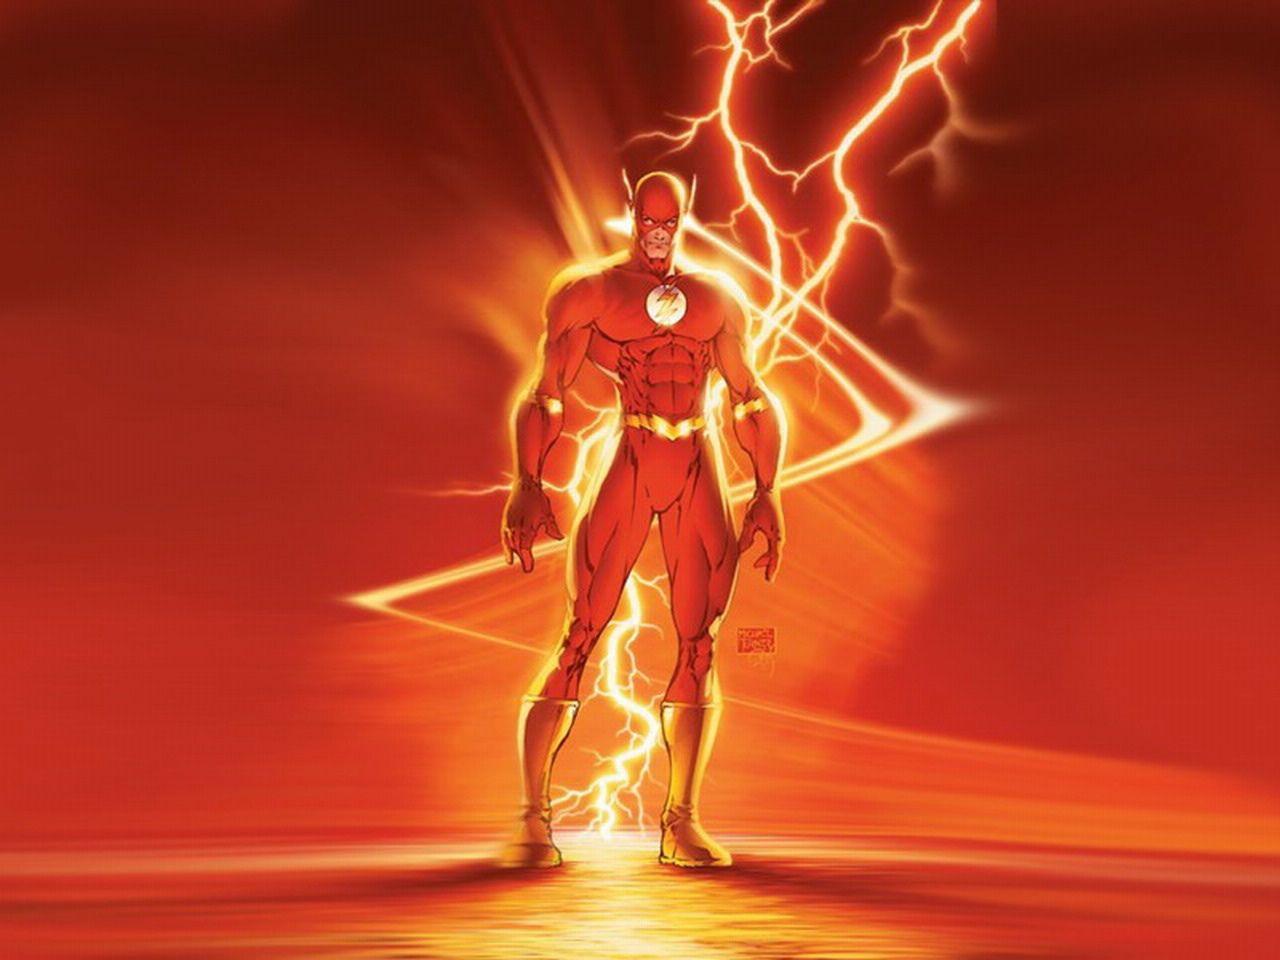 The Flash HD Image & Wallpaper. HD IMAGES 1080p